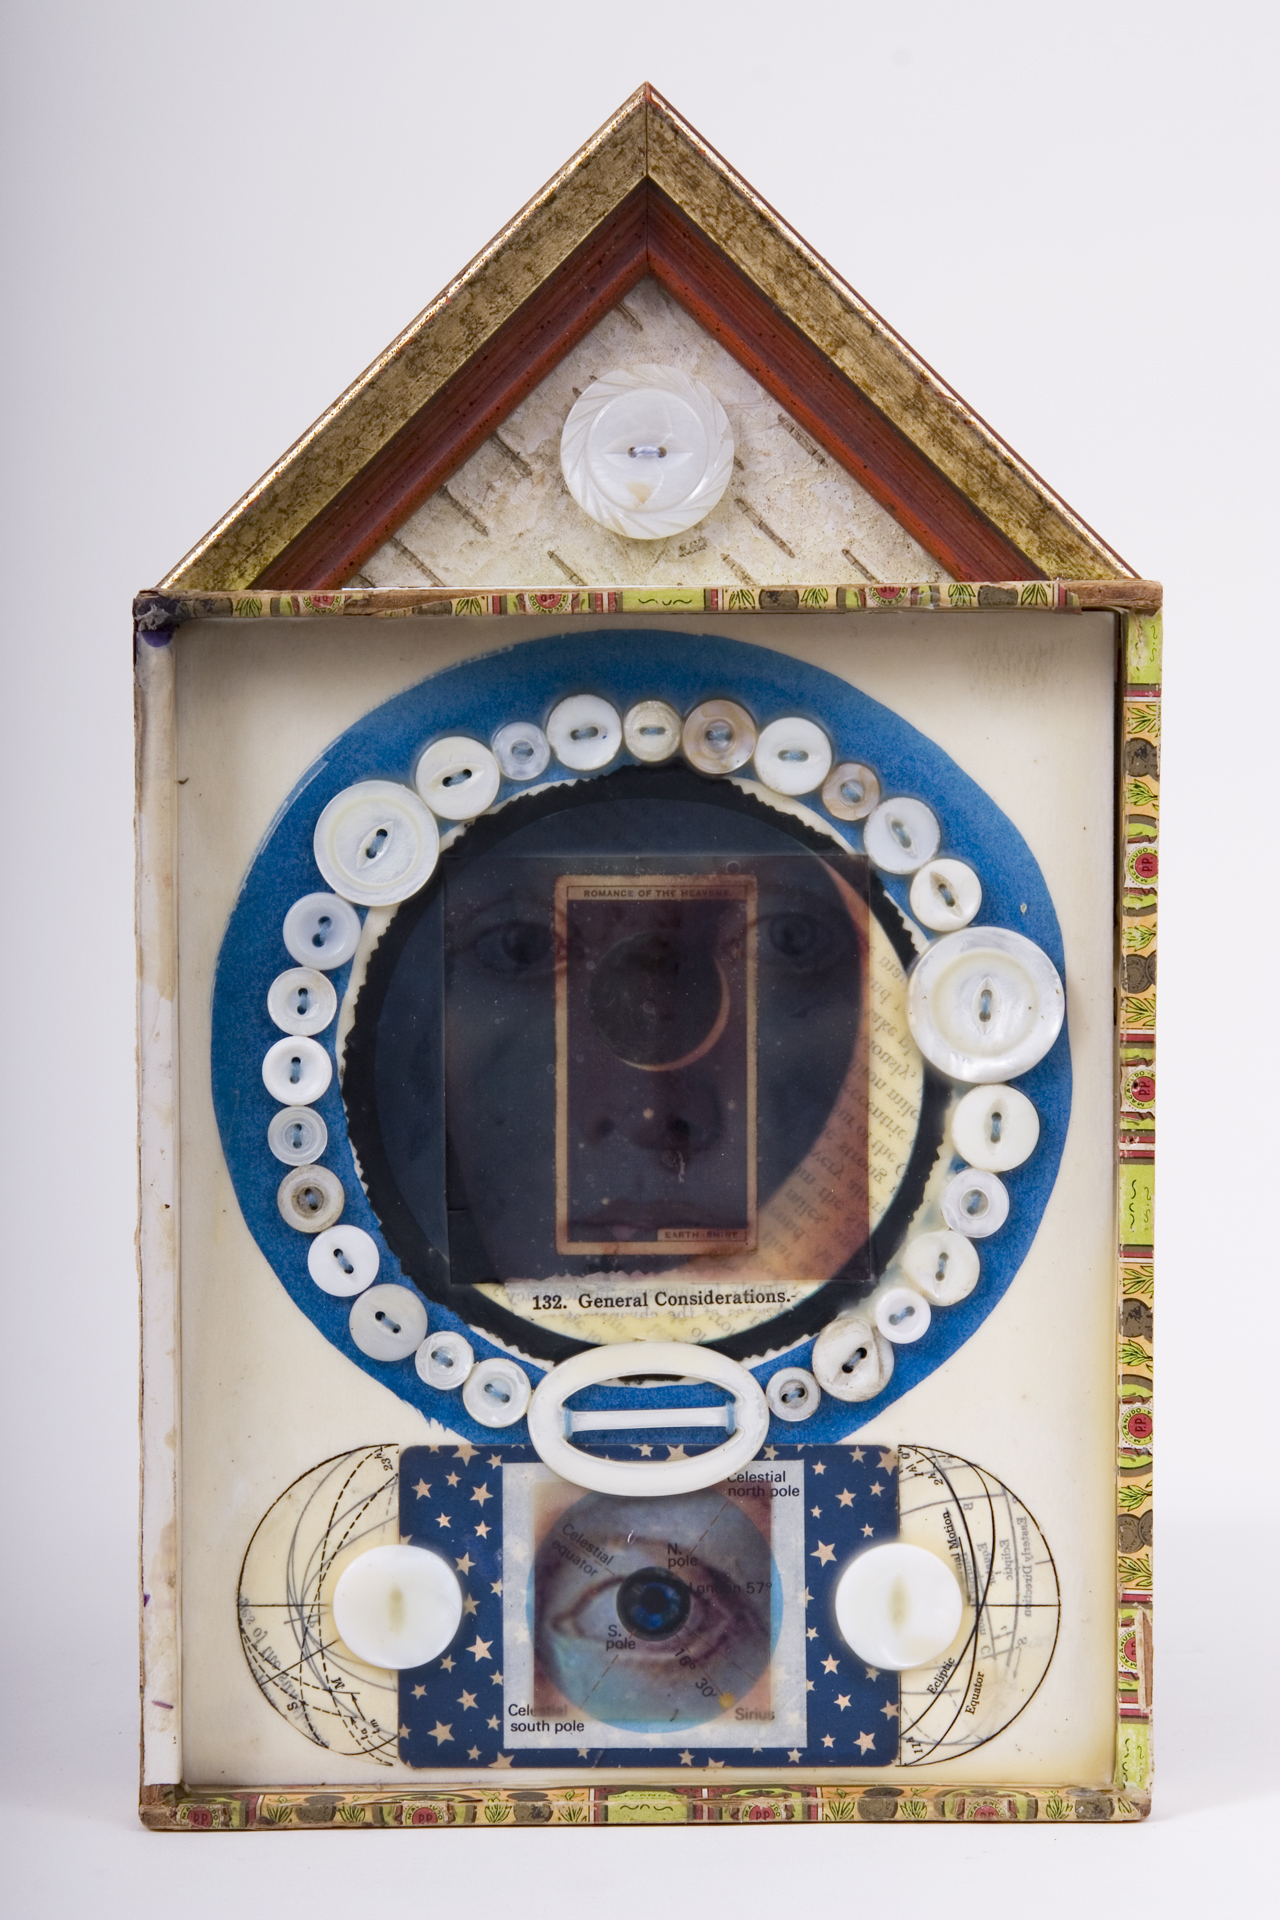     \"132. General Considerations\"
    mixed-media assemblage
    12 x 7 x 1.5
    2009
    SOLD
    Cigar box, frame sample, birch bark, mother of pearl buttons & buckle, fortune & tobac cards, transparencies, ink, wax, astronomy text on watercolor paper